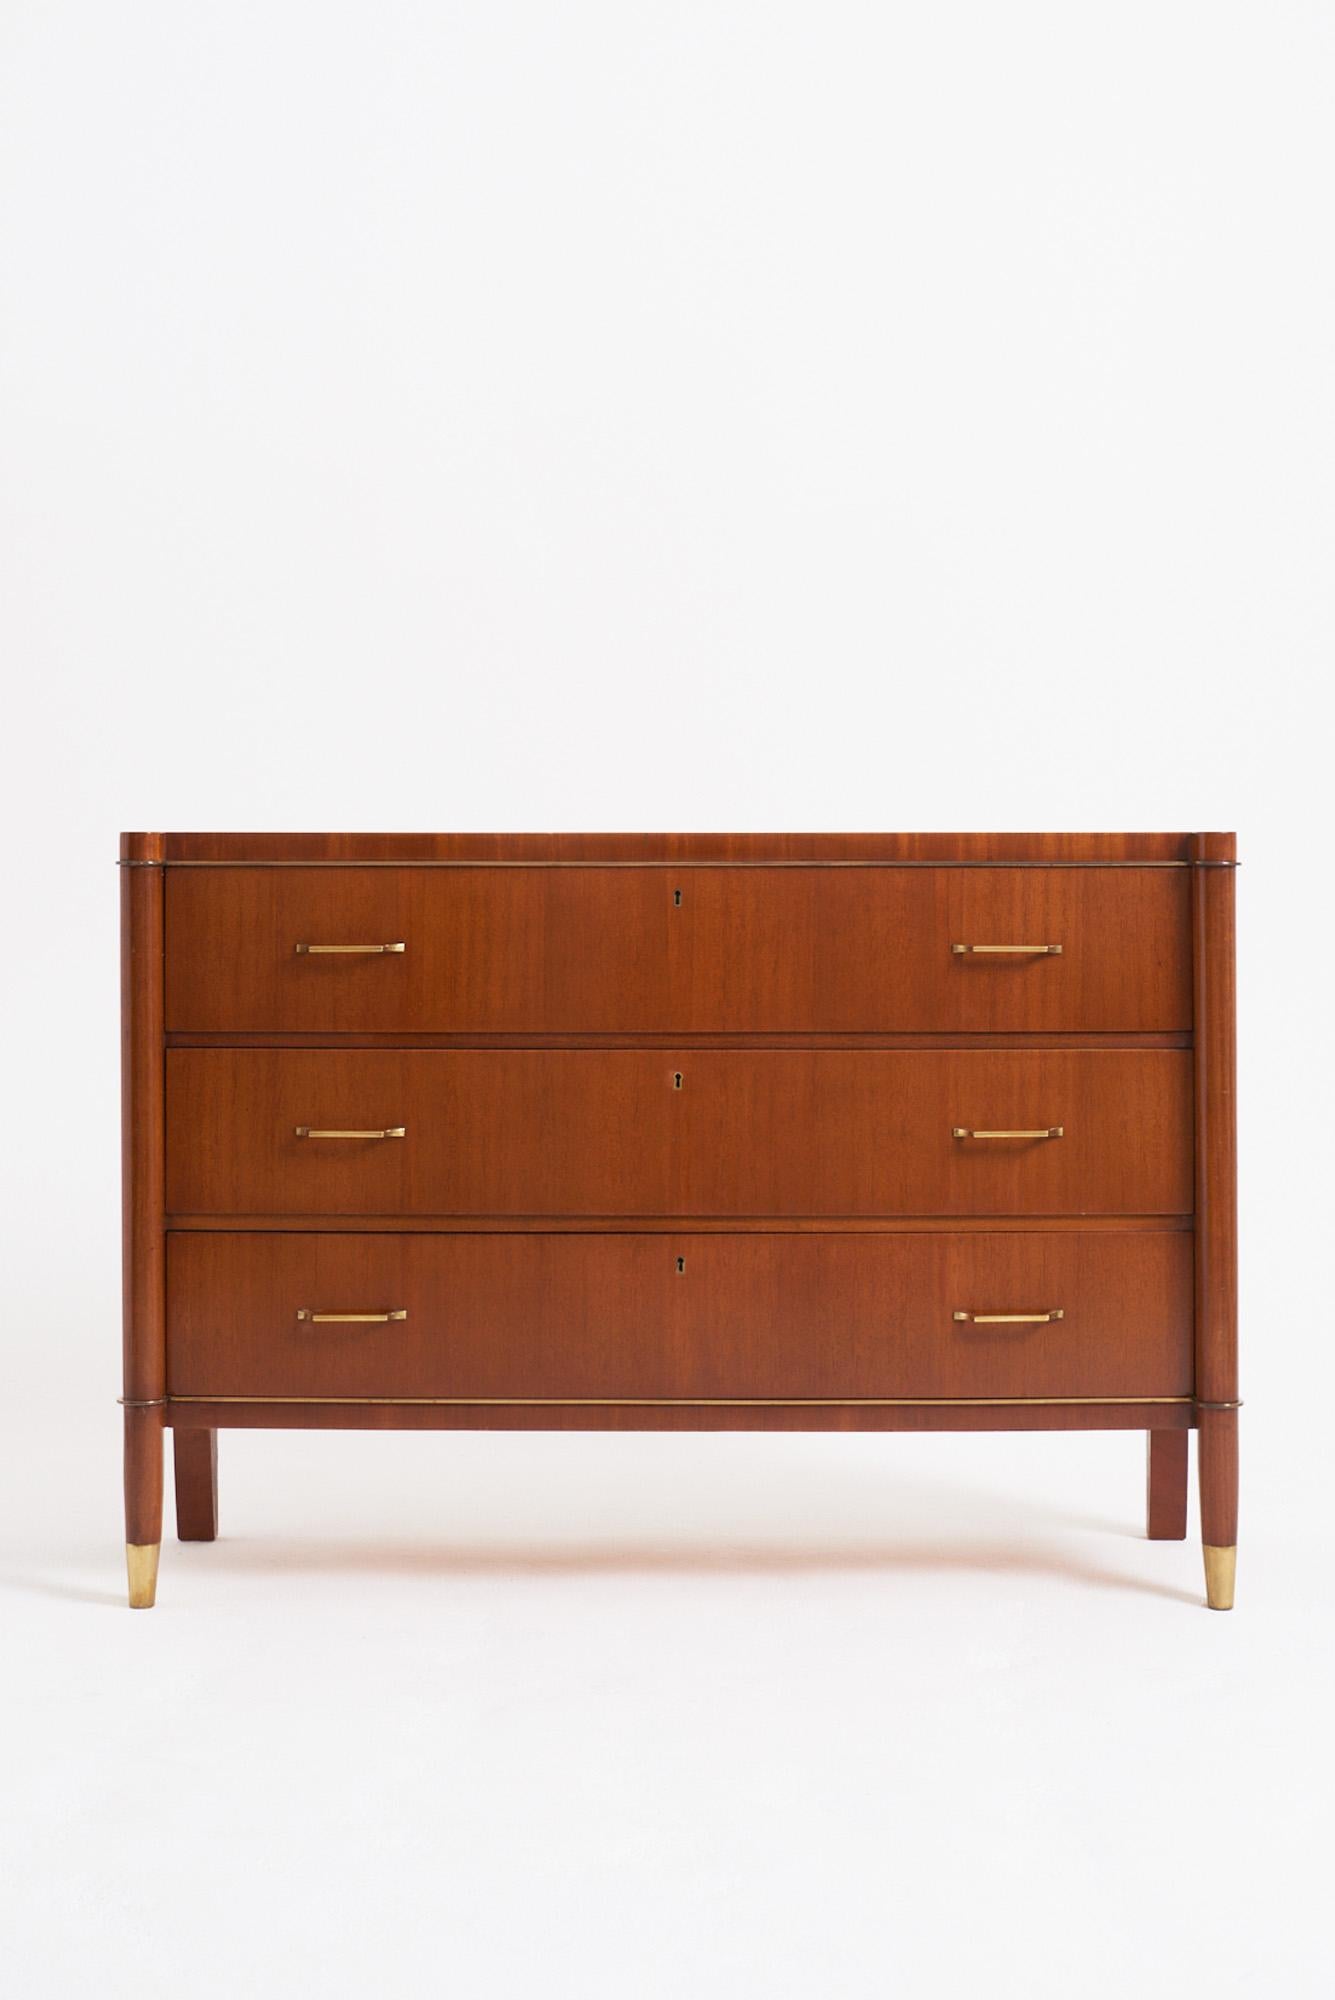 A mahogany and brass mounted chest of drawers by de Coene Frères.
Belgium, 1940s